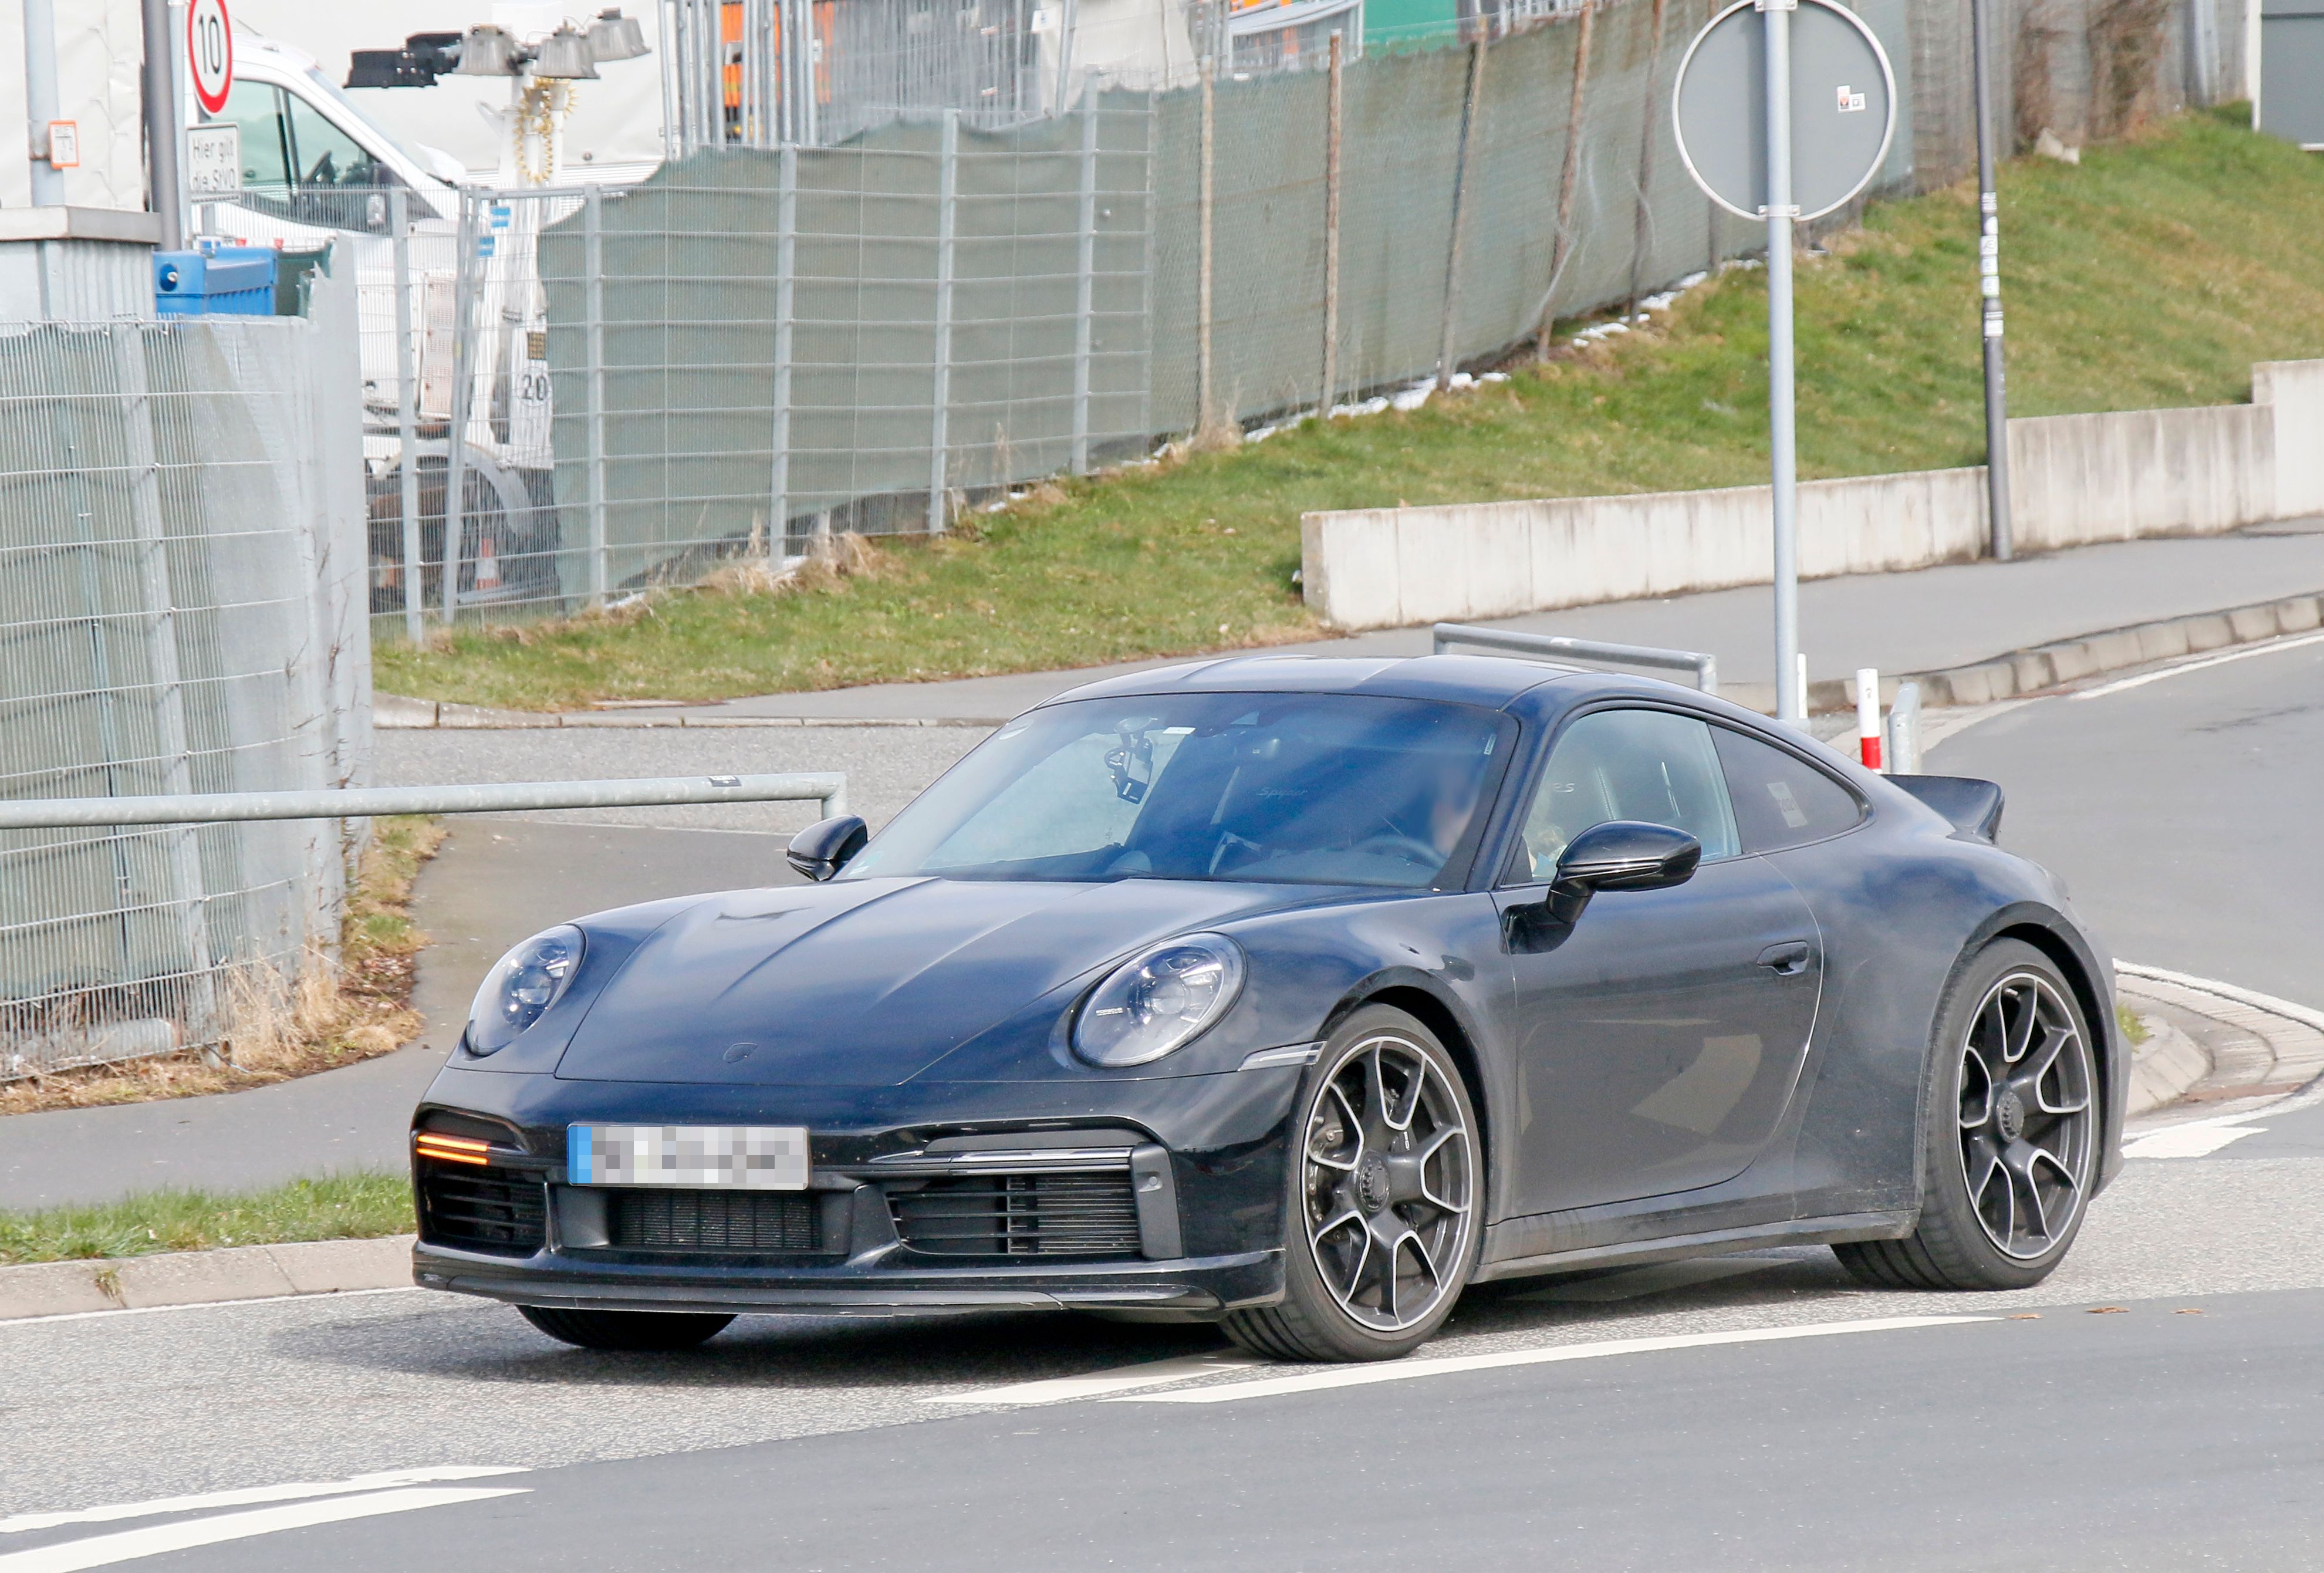 2022 A New Retro-Inspired Porsche 911 Is Coming - This is What You Need to Know About it